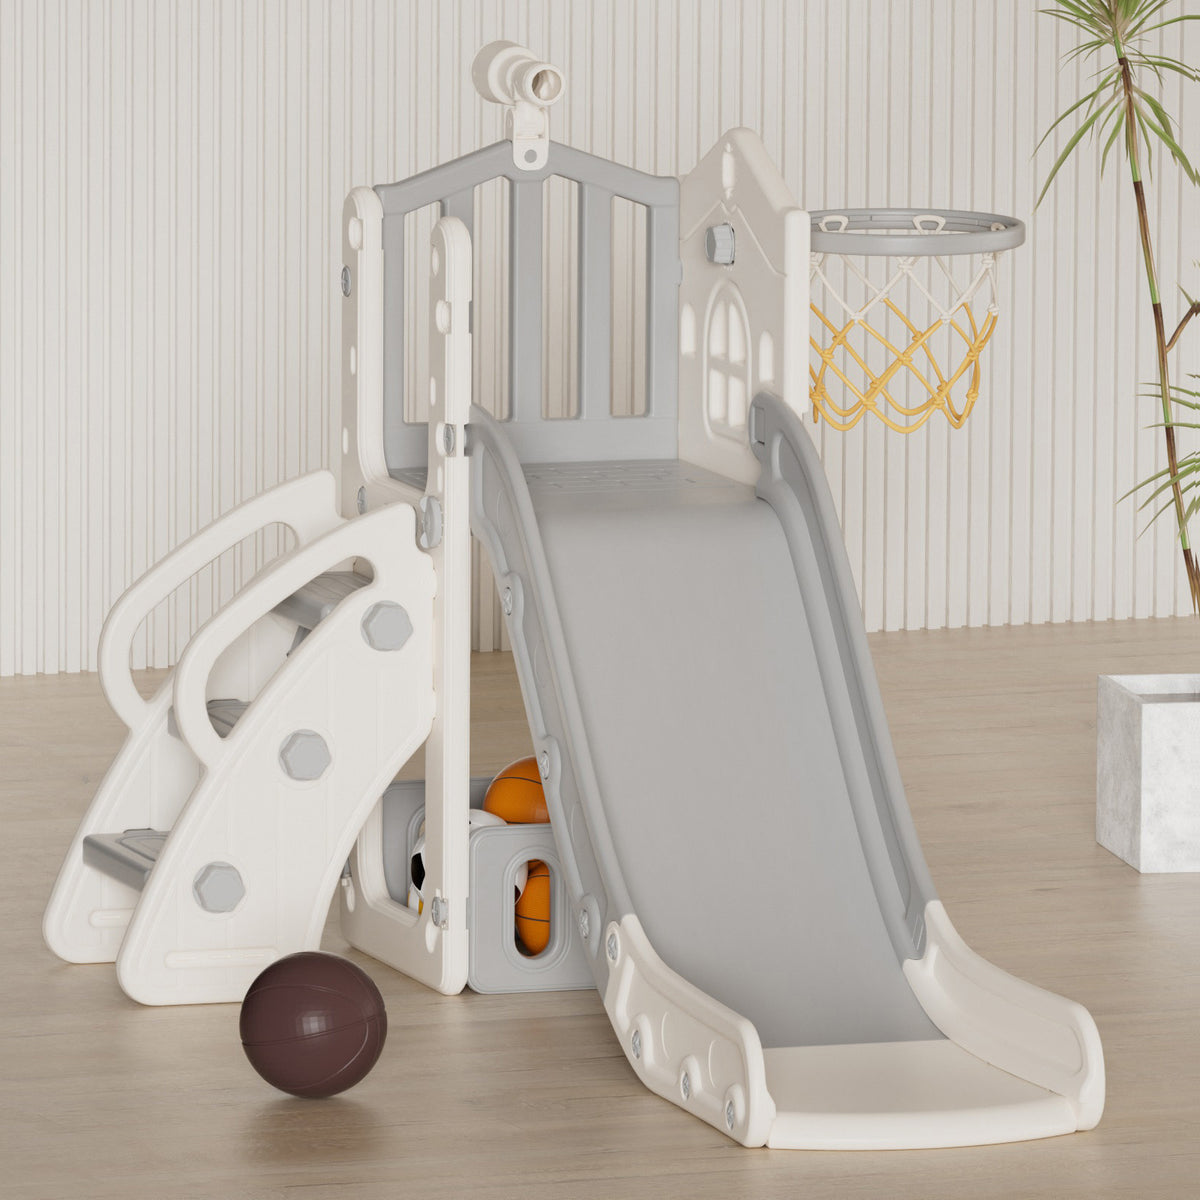 XJD 5 in 1 Toddler Slide Set  Climber Slide for Age 1-3, Outdoor Indoor Playset with Basketball Hoop, Telescope, and Storage Space, Gray/Grey